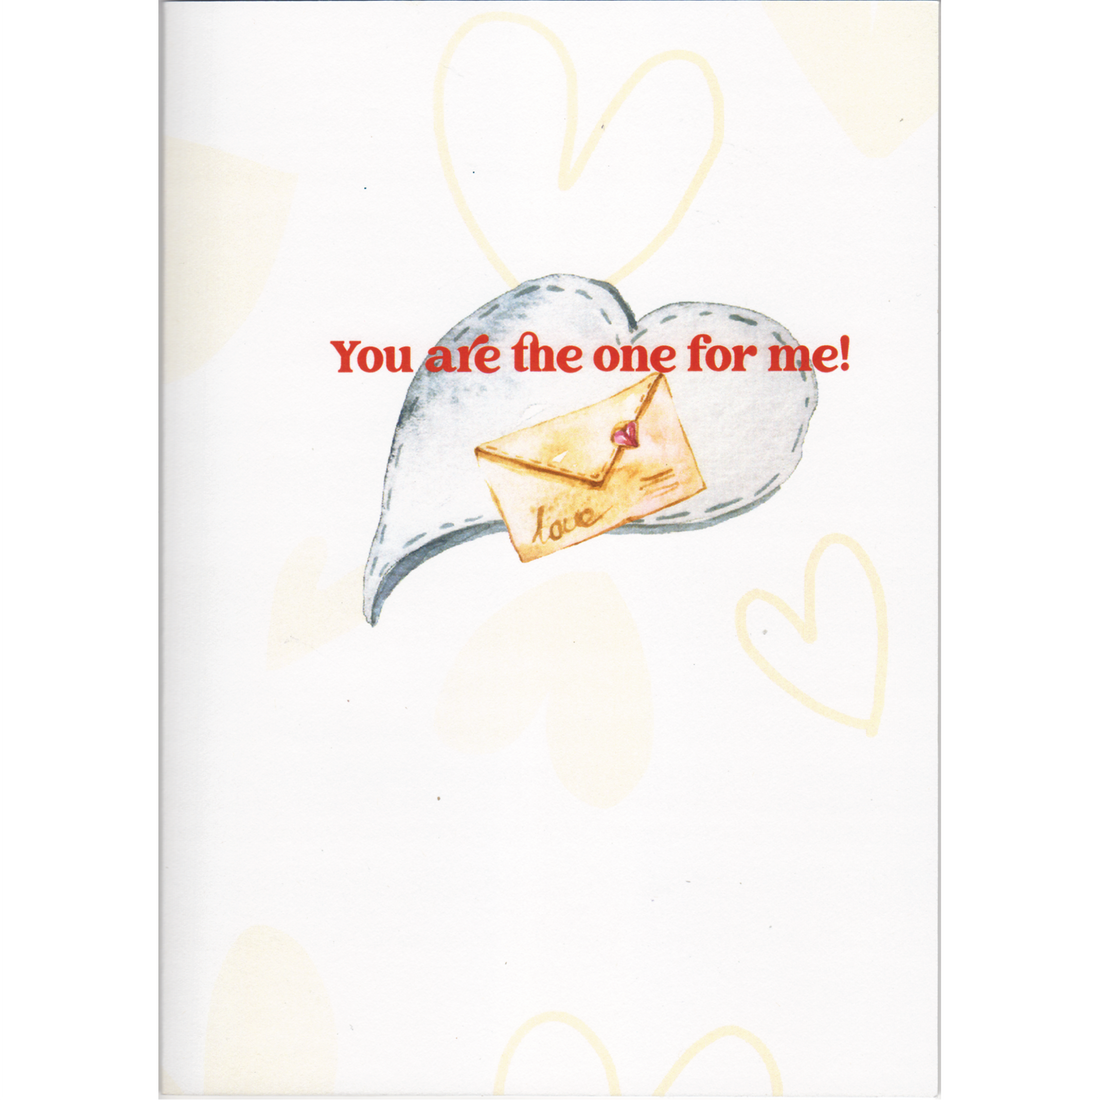 There is a light brown heart pattern paper with the words &quot;You are the one for me!&quot; an image of envelope featuring a heart and the word love in front of a heart.